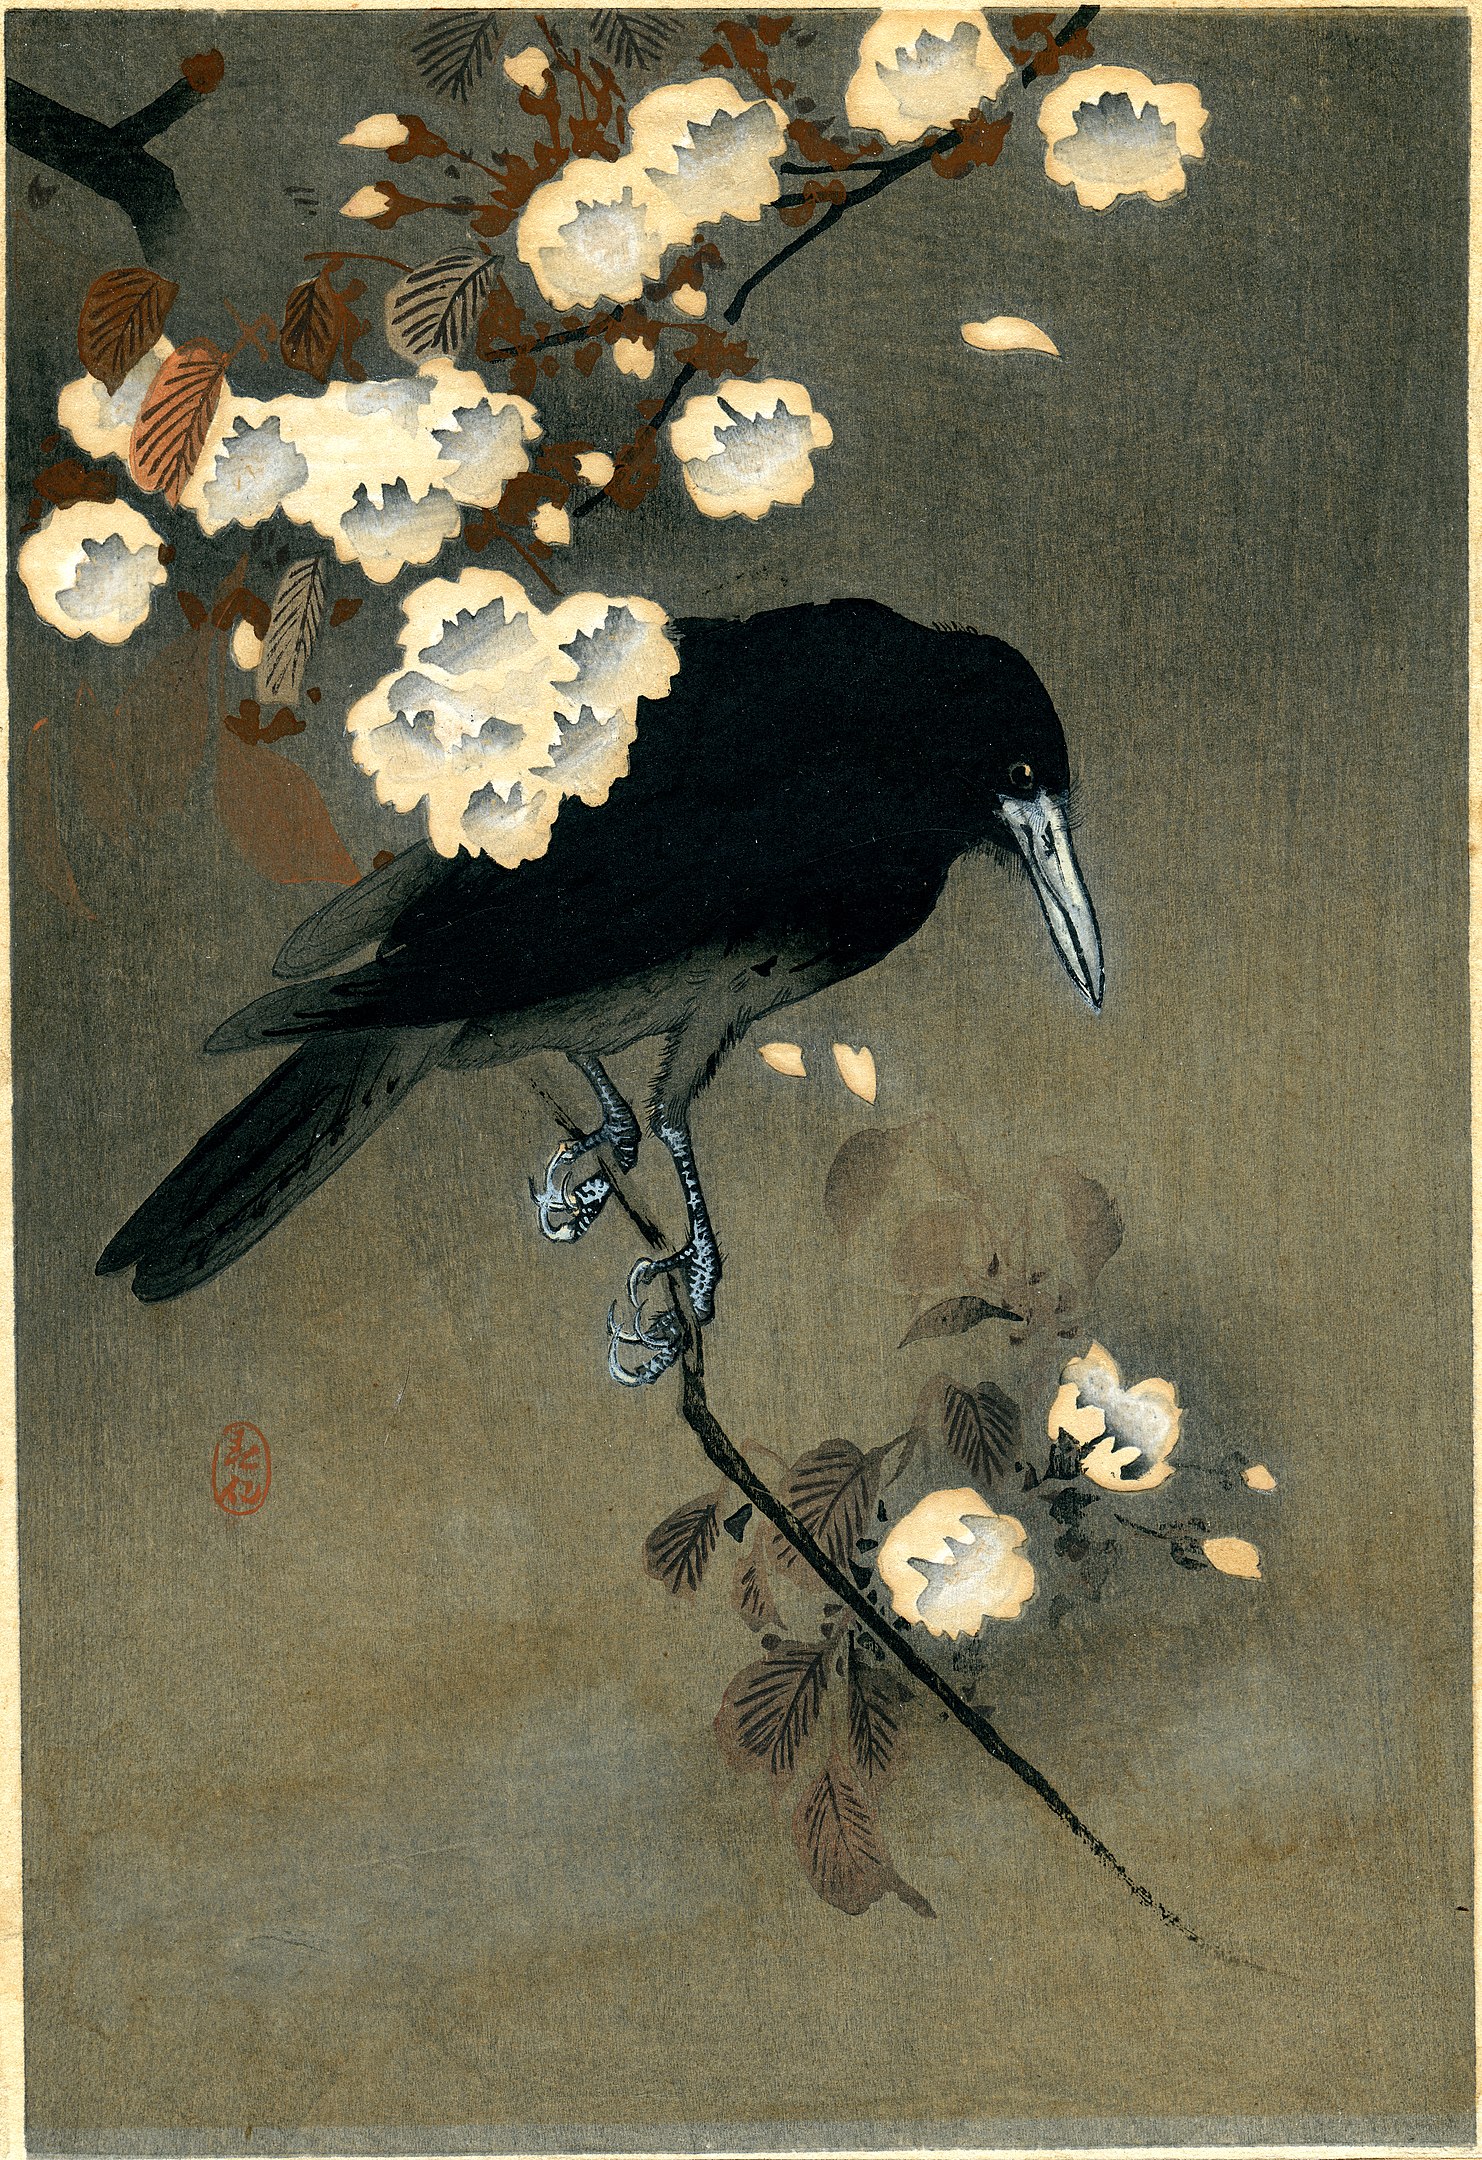 A crow on a tree branch sprouting white blossoms